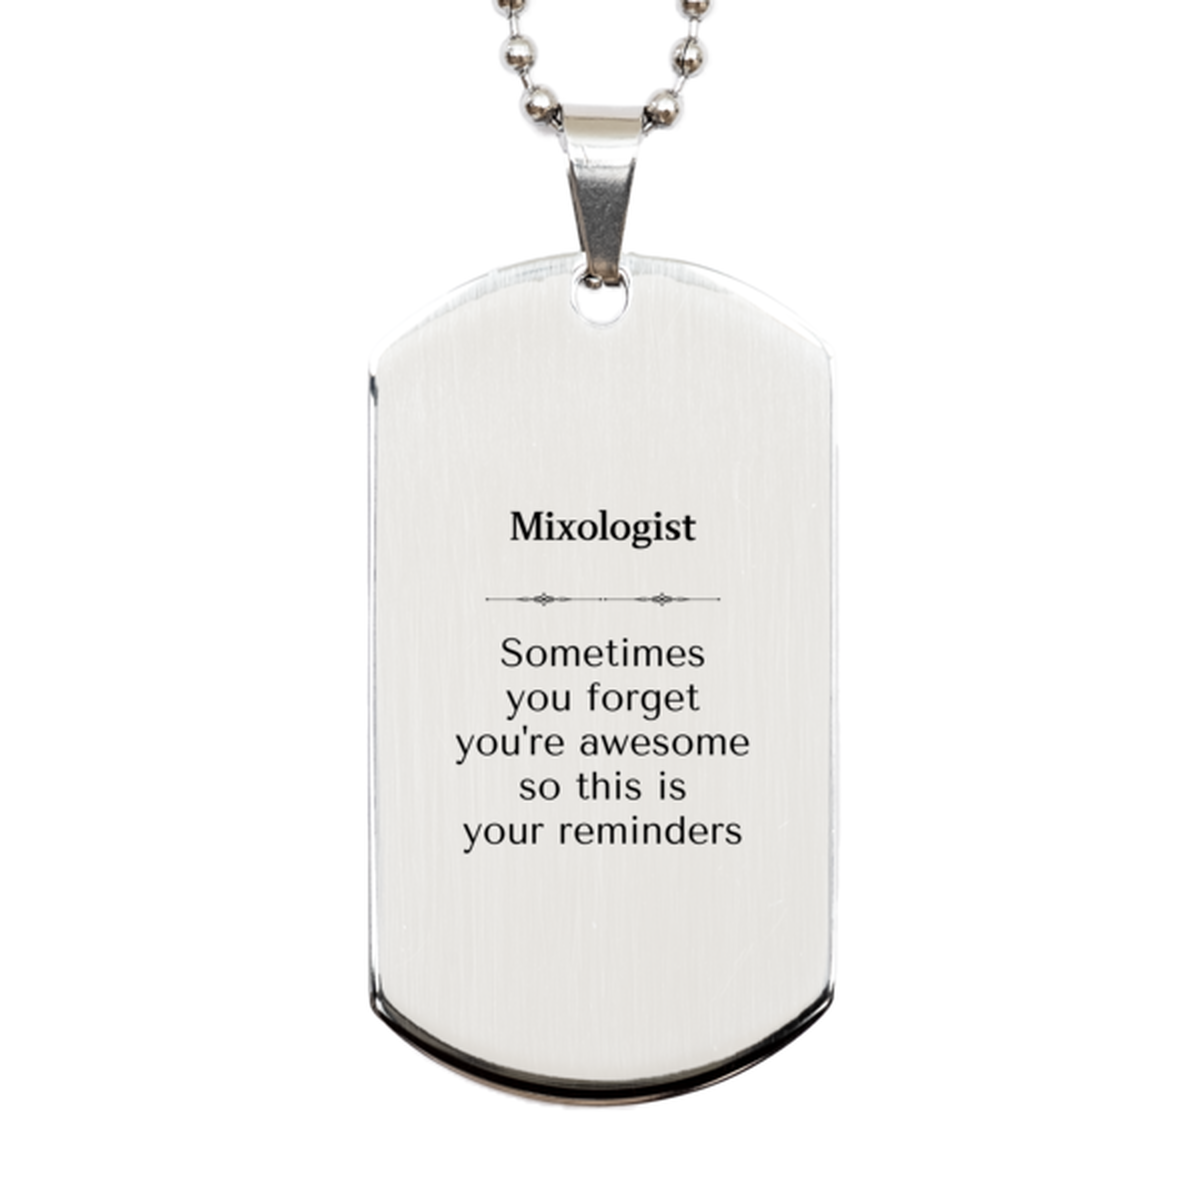 Sentimental Mixologist Silver Dog Tag, Mixologist Sometimes you forget you're awesome so this is your reminders, Graduation Christmas Birthday Gifts for Mixologist, Men, Women, Coworkers